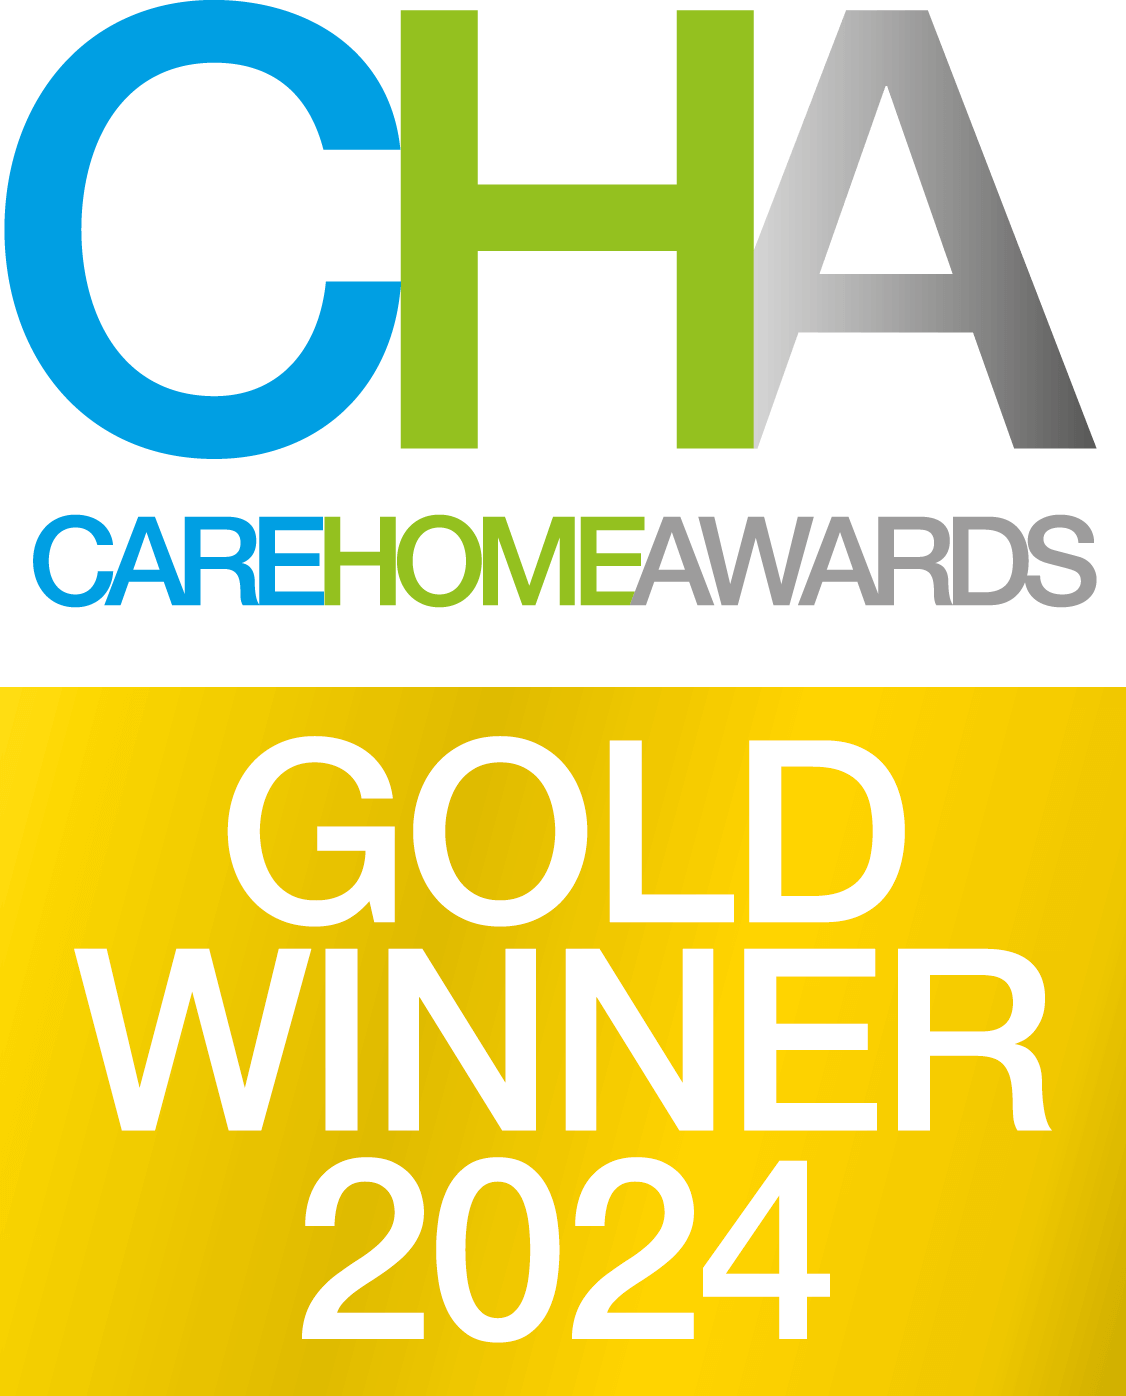 Care Home Awards 2024 winner - Outstanding Care Provider in a Group